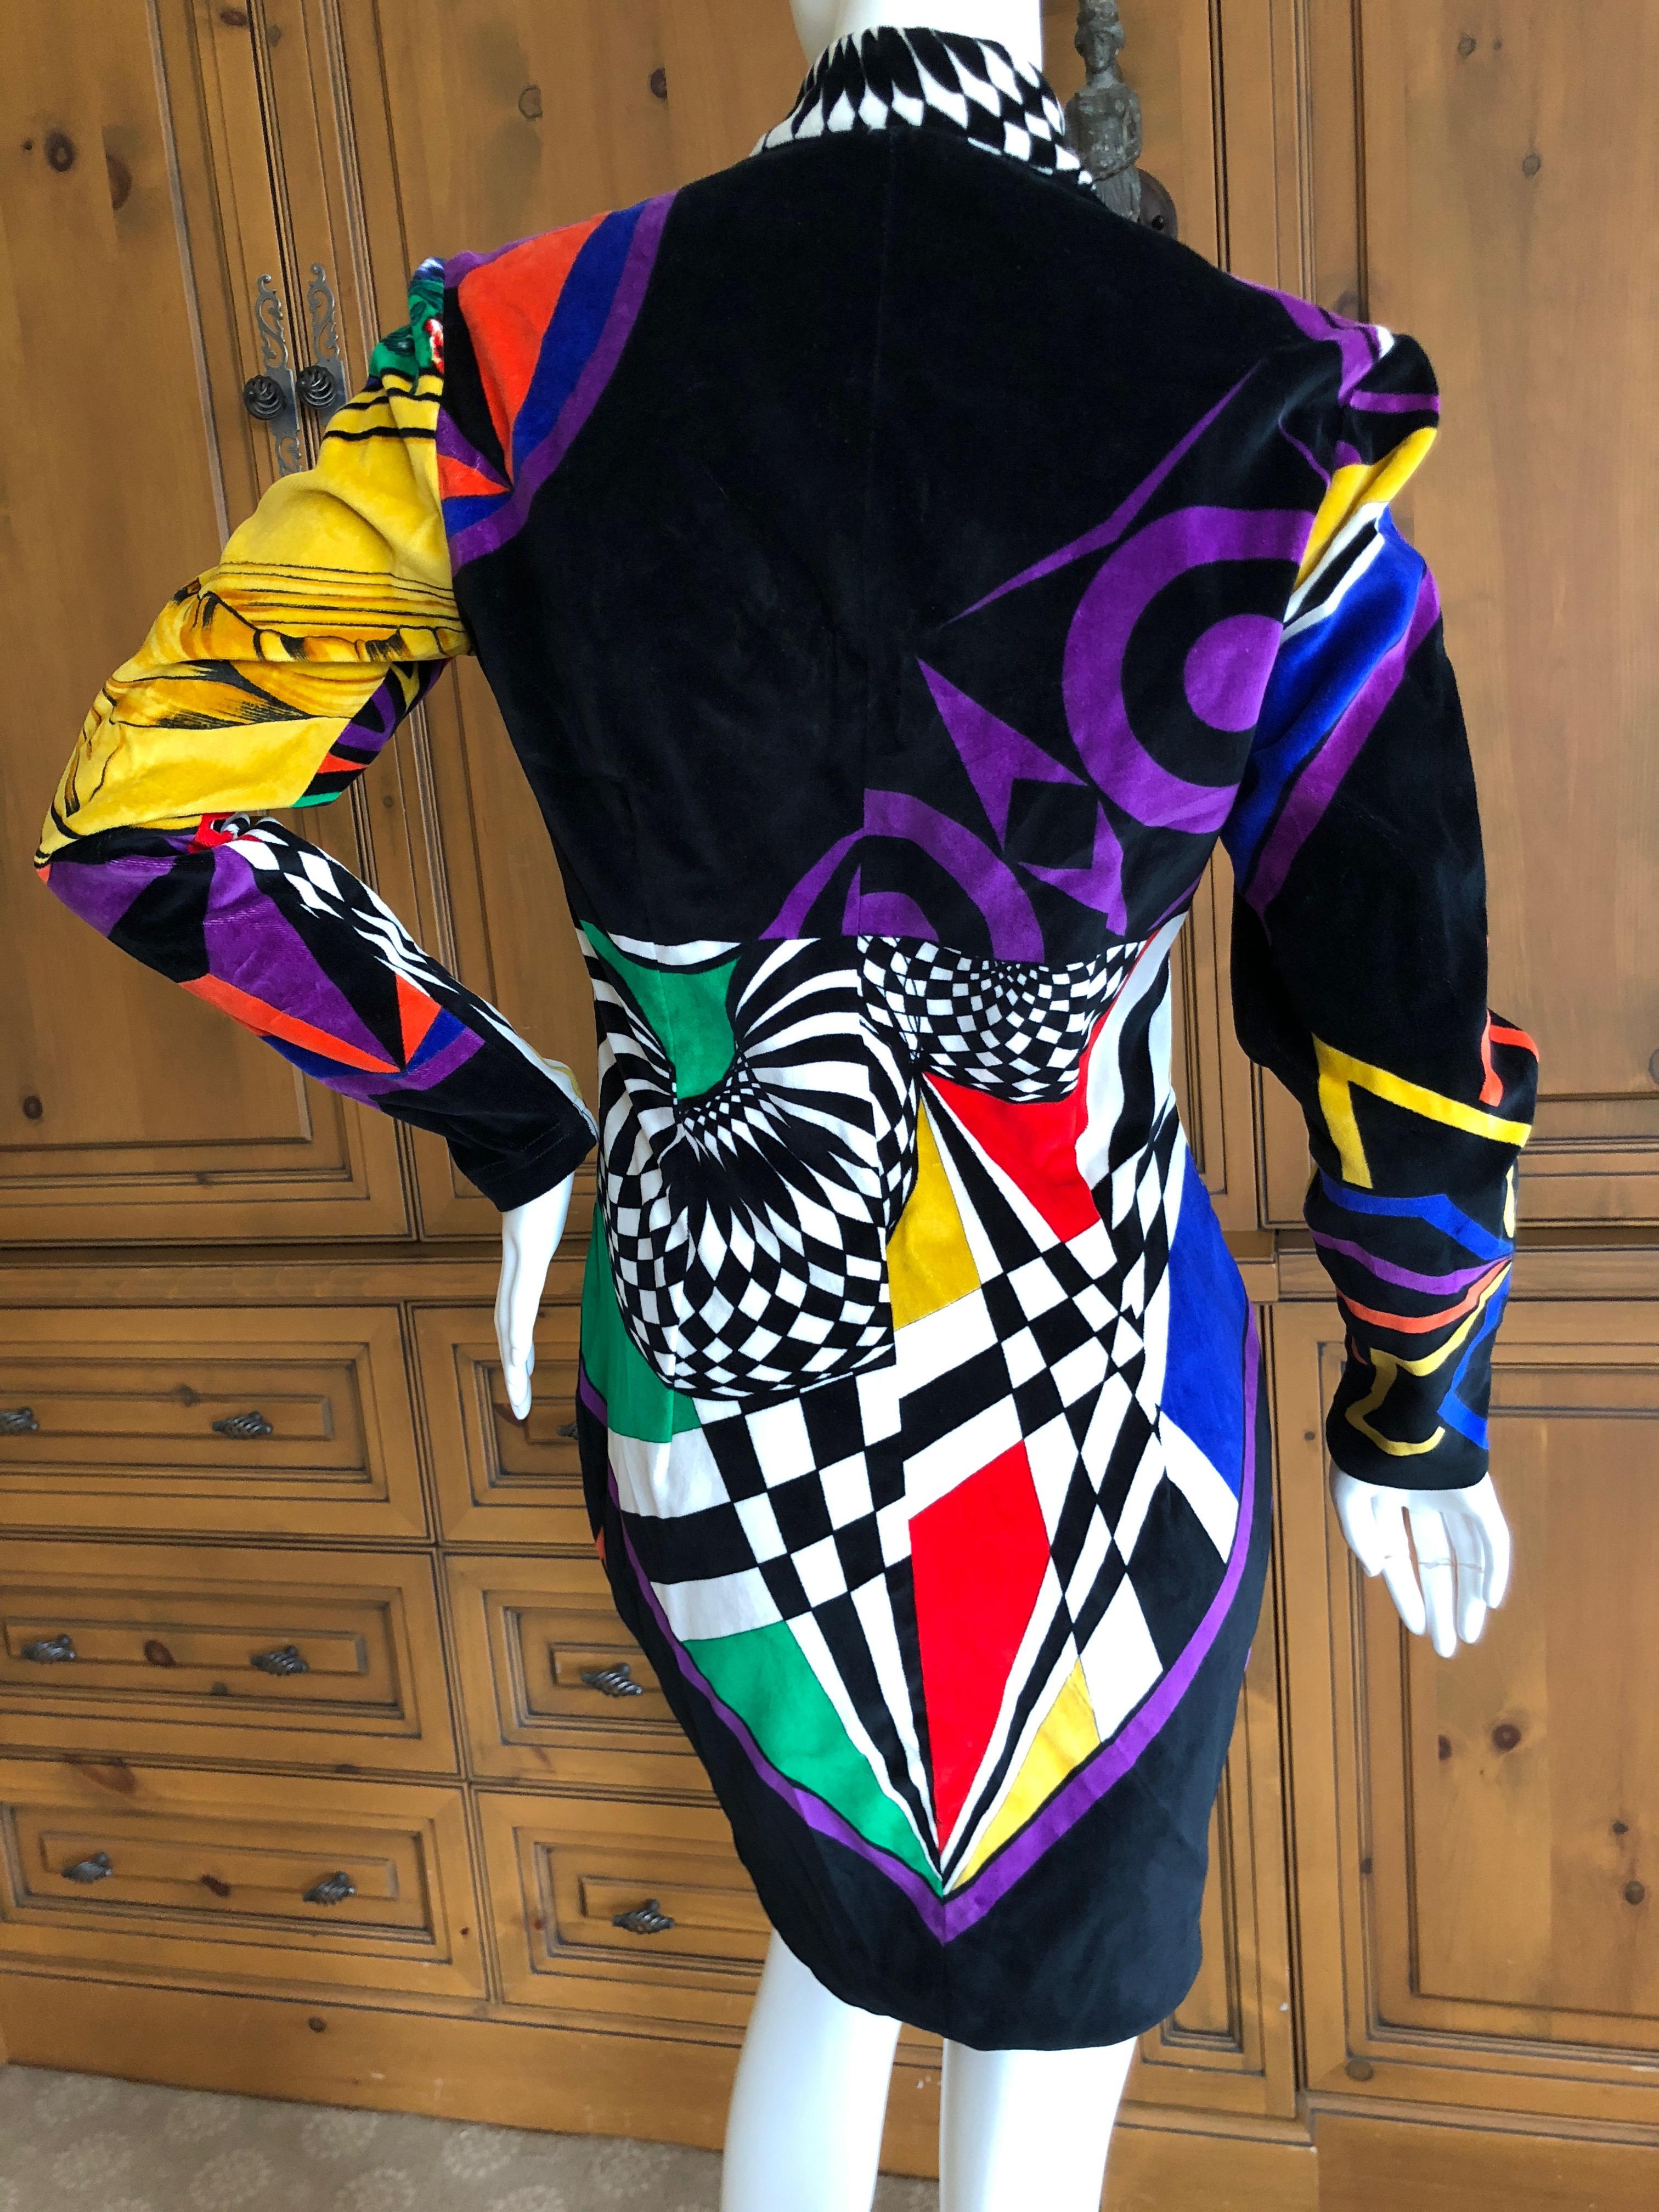 Gianni Versace Vintage Versus op art dress
Marked size 42, it is appx size 6 today
Bust 38